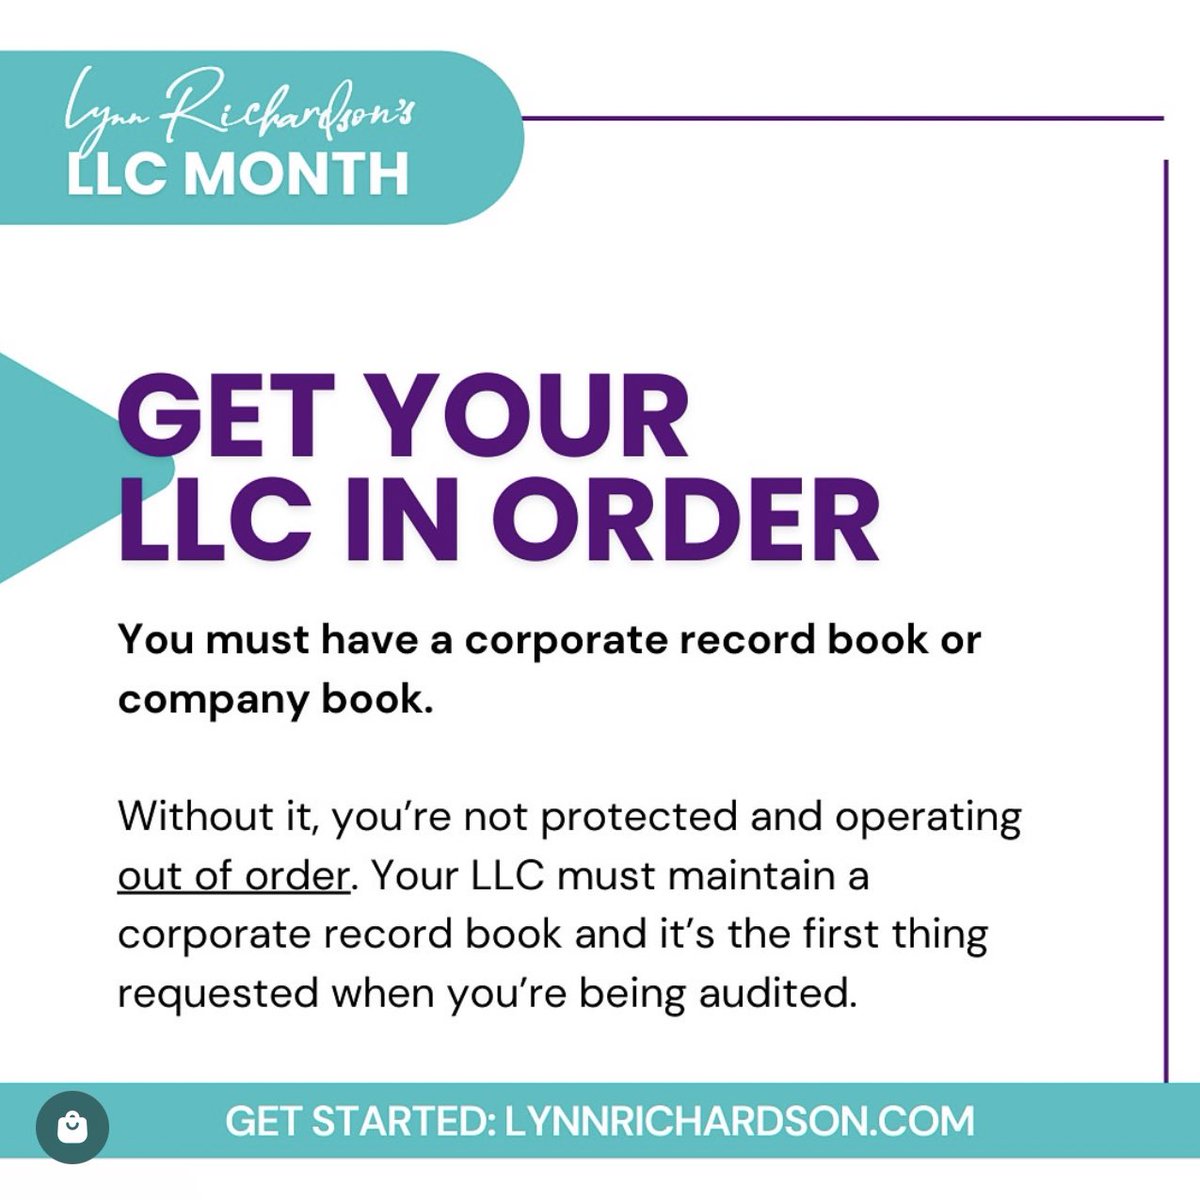 This #LLCMonth- GET YOUR LLC IN ORDER. 📄💻 You've heard me say this many times before. You MUST have a corporate record book or company book. If you don't, you're operating OUT OF ORDER. Don't know where to start? GET IN CLASS. Get Help: Asklynn.org